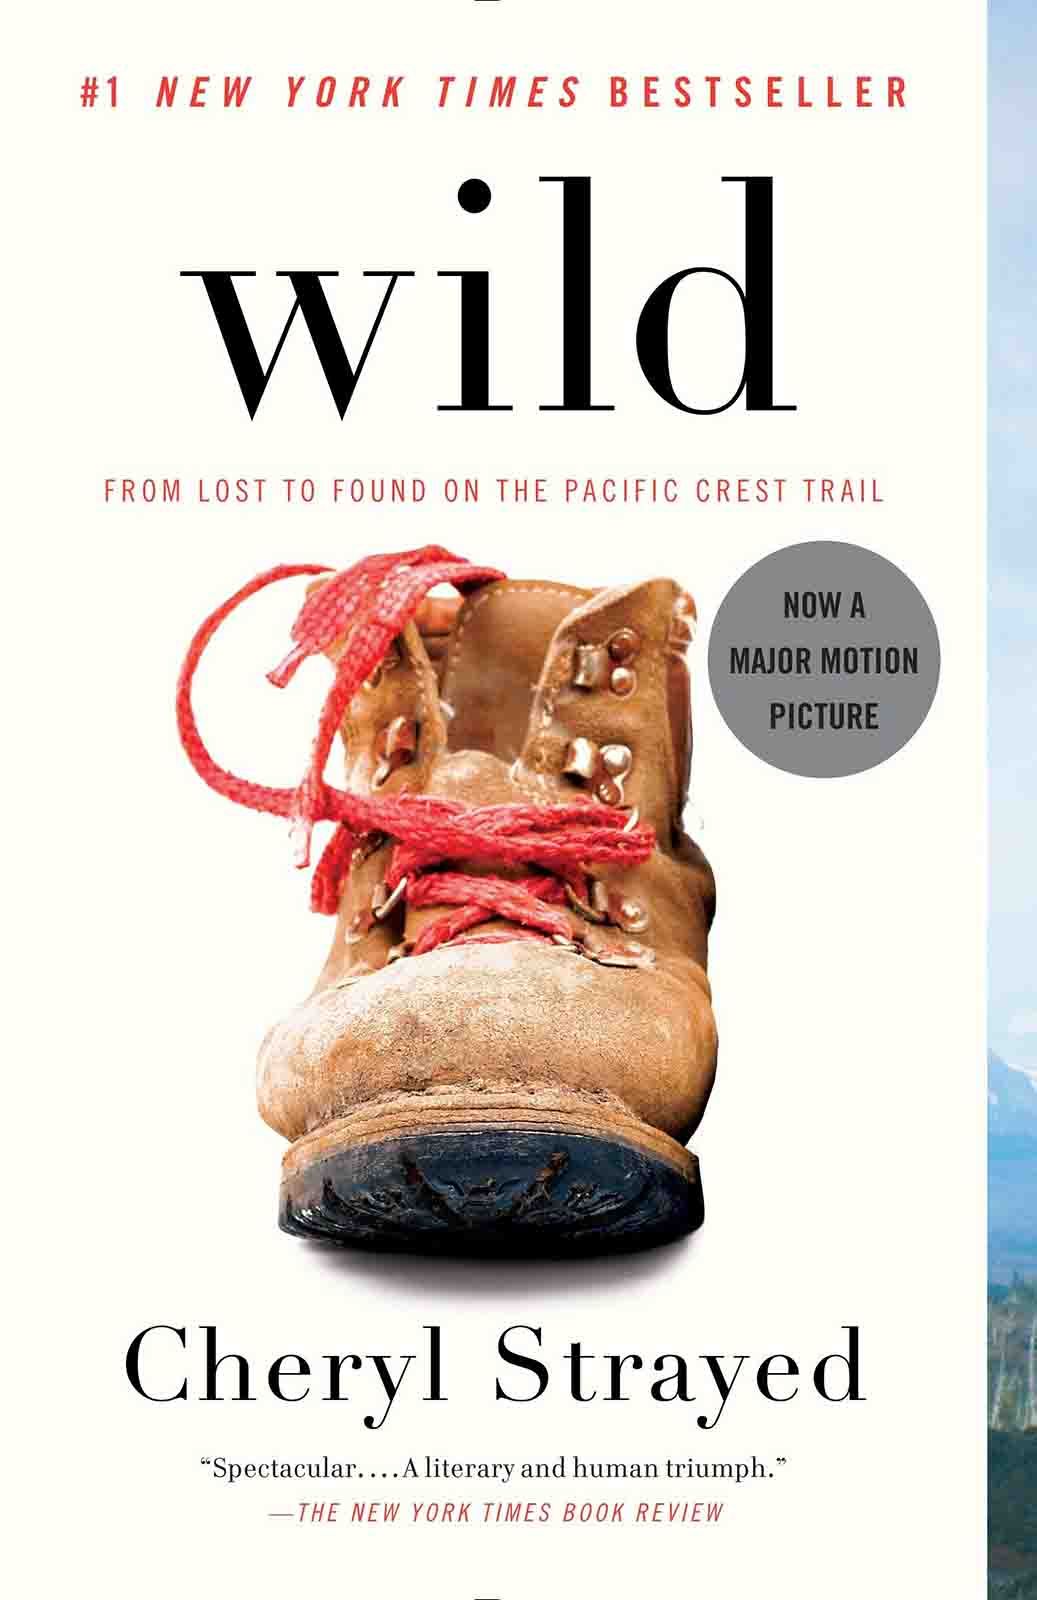  Wild: From Lost to Found on the Pacific Crest Trail by Cheryl Strayed book cover